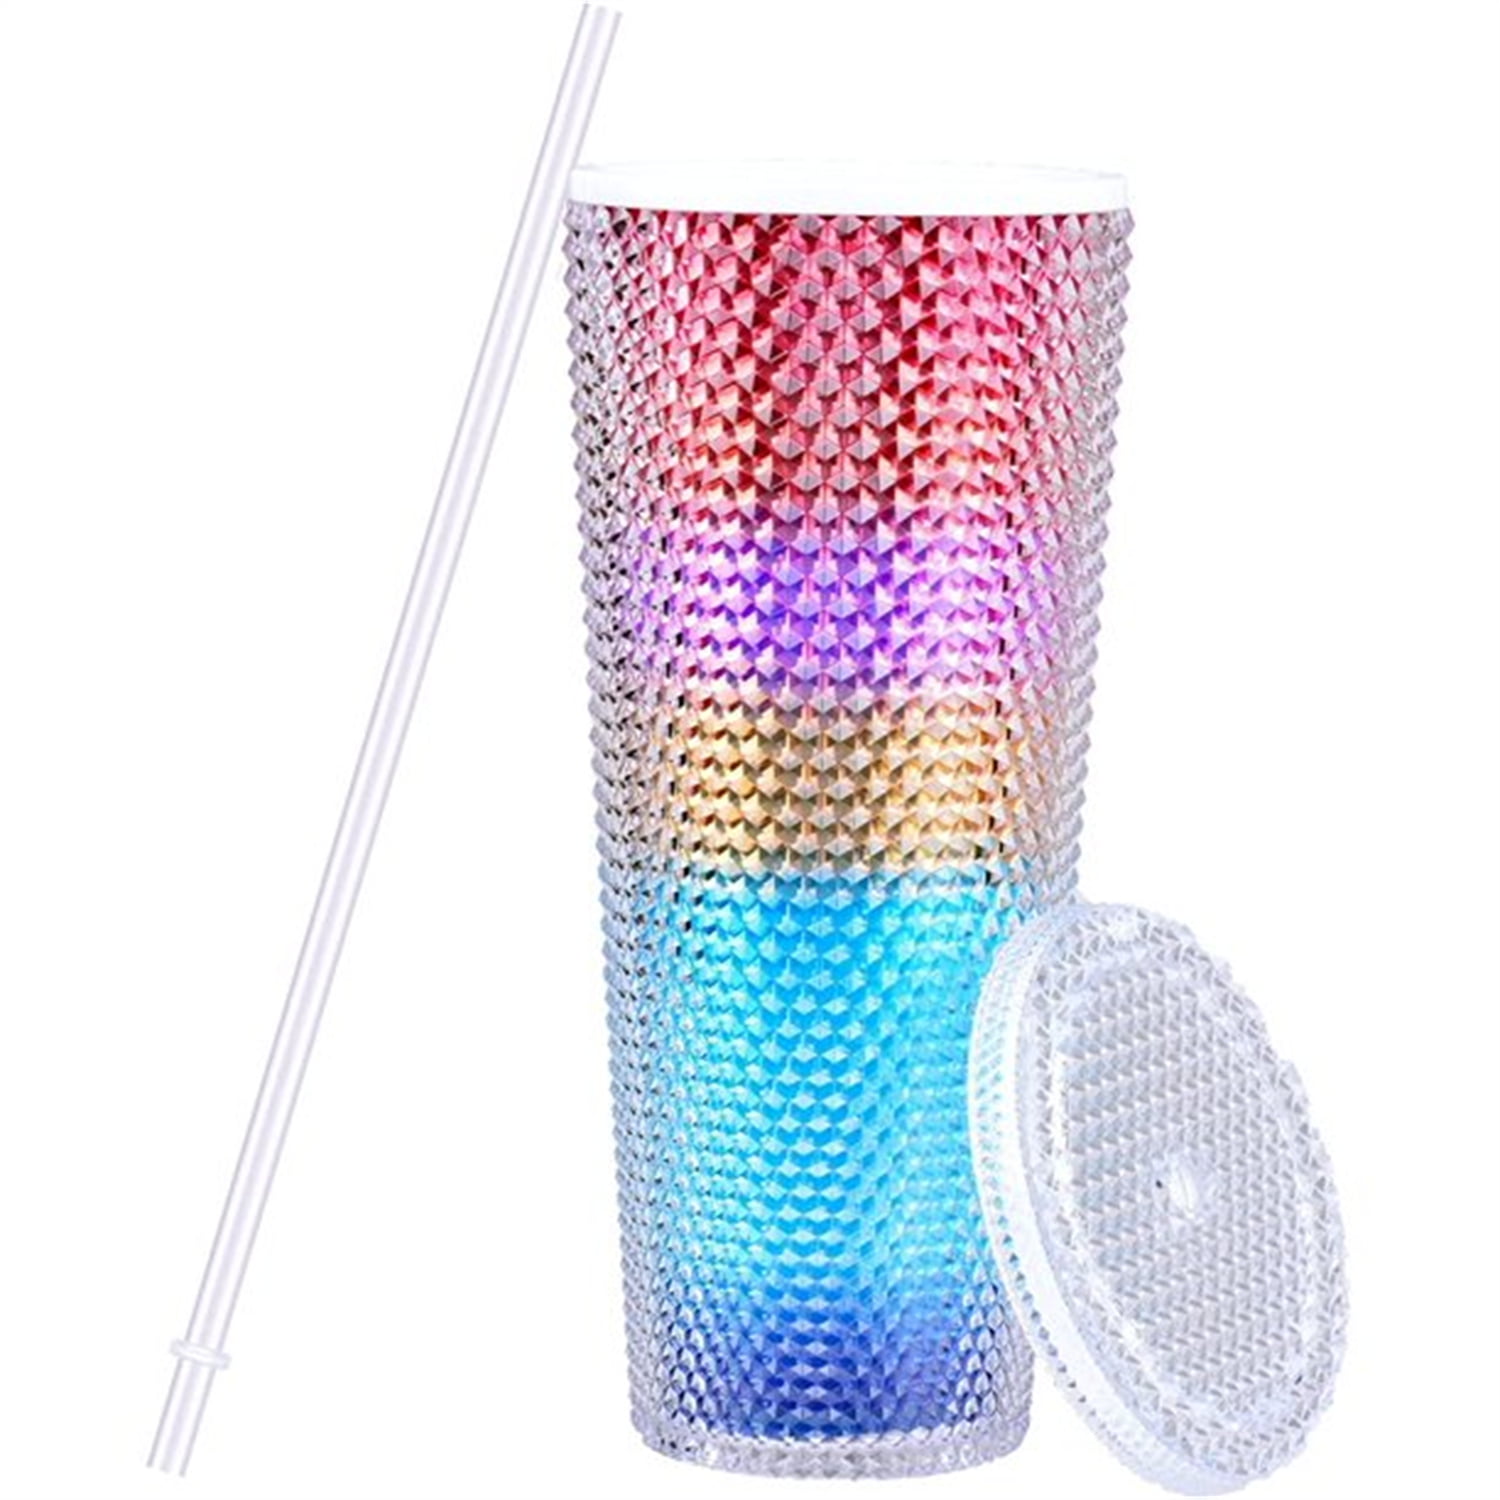 Cafezi Studded Tumbler with Lid and Straw, 24oz Reusable  Double Wall Matte Iced Coffee Cup Smoothie Cup Travel Mug - For Cold Only,  BPA Free, Wide Mouth for Easy Cleaning - (